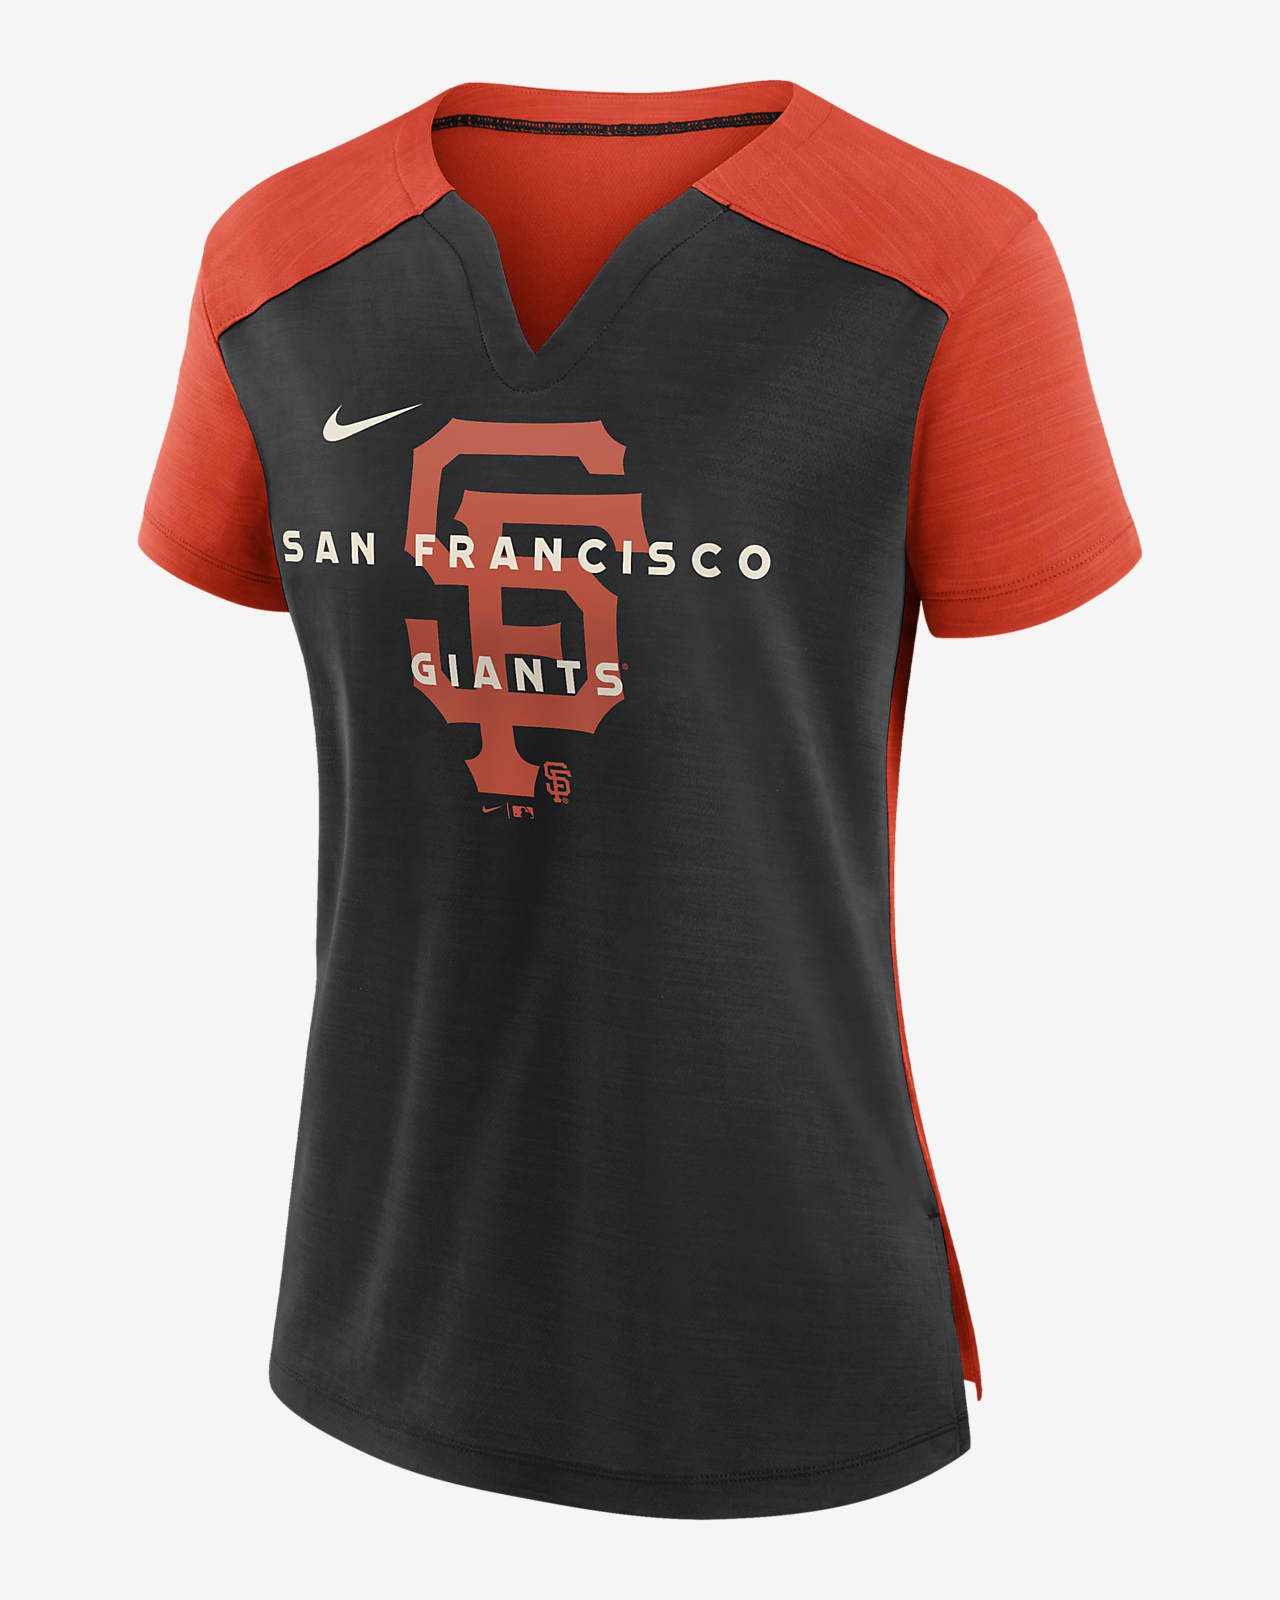 san francico giants nike shirts and majestic therma base - clothing &  accessories - by owner - apparel sale - craigslist